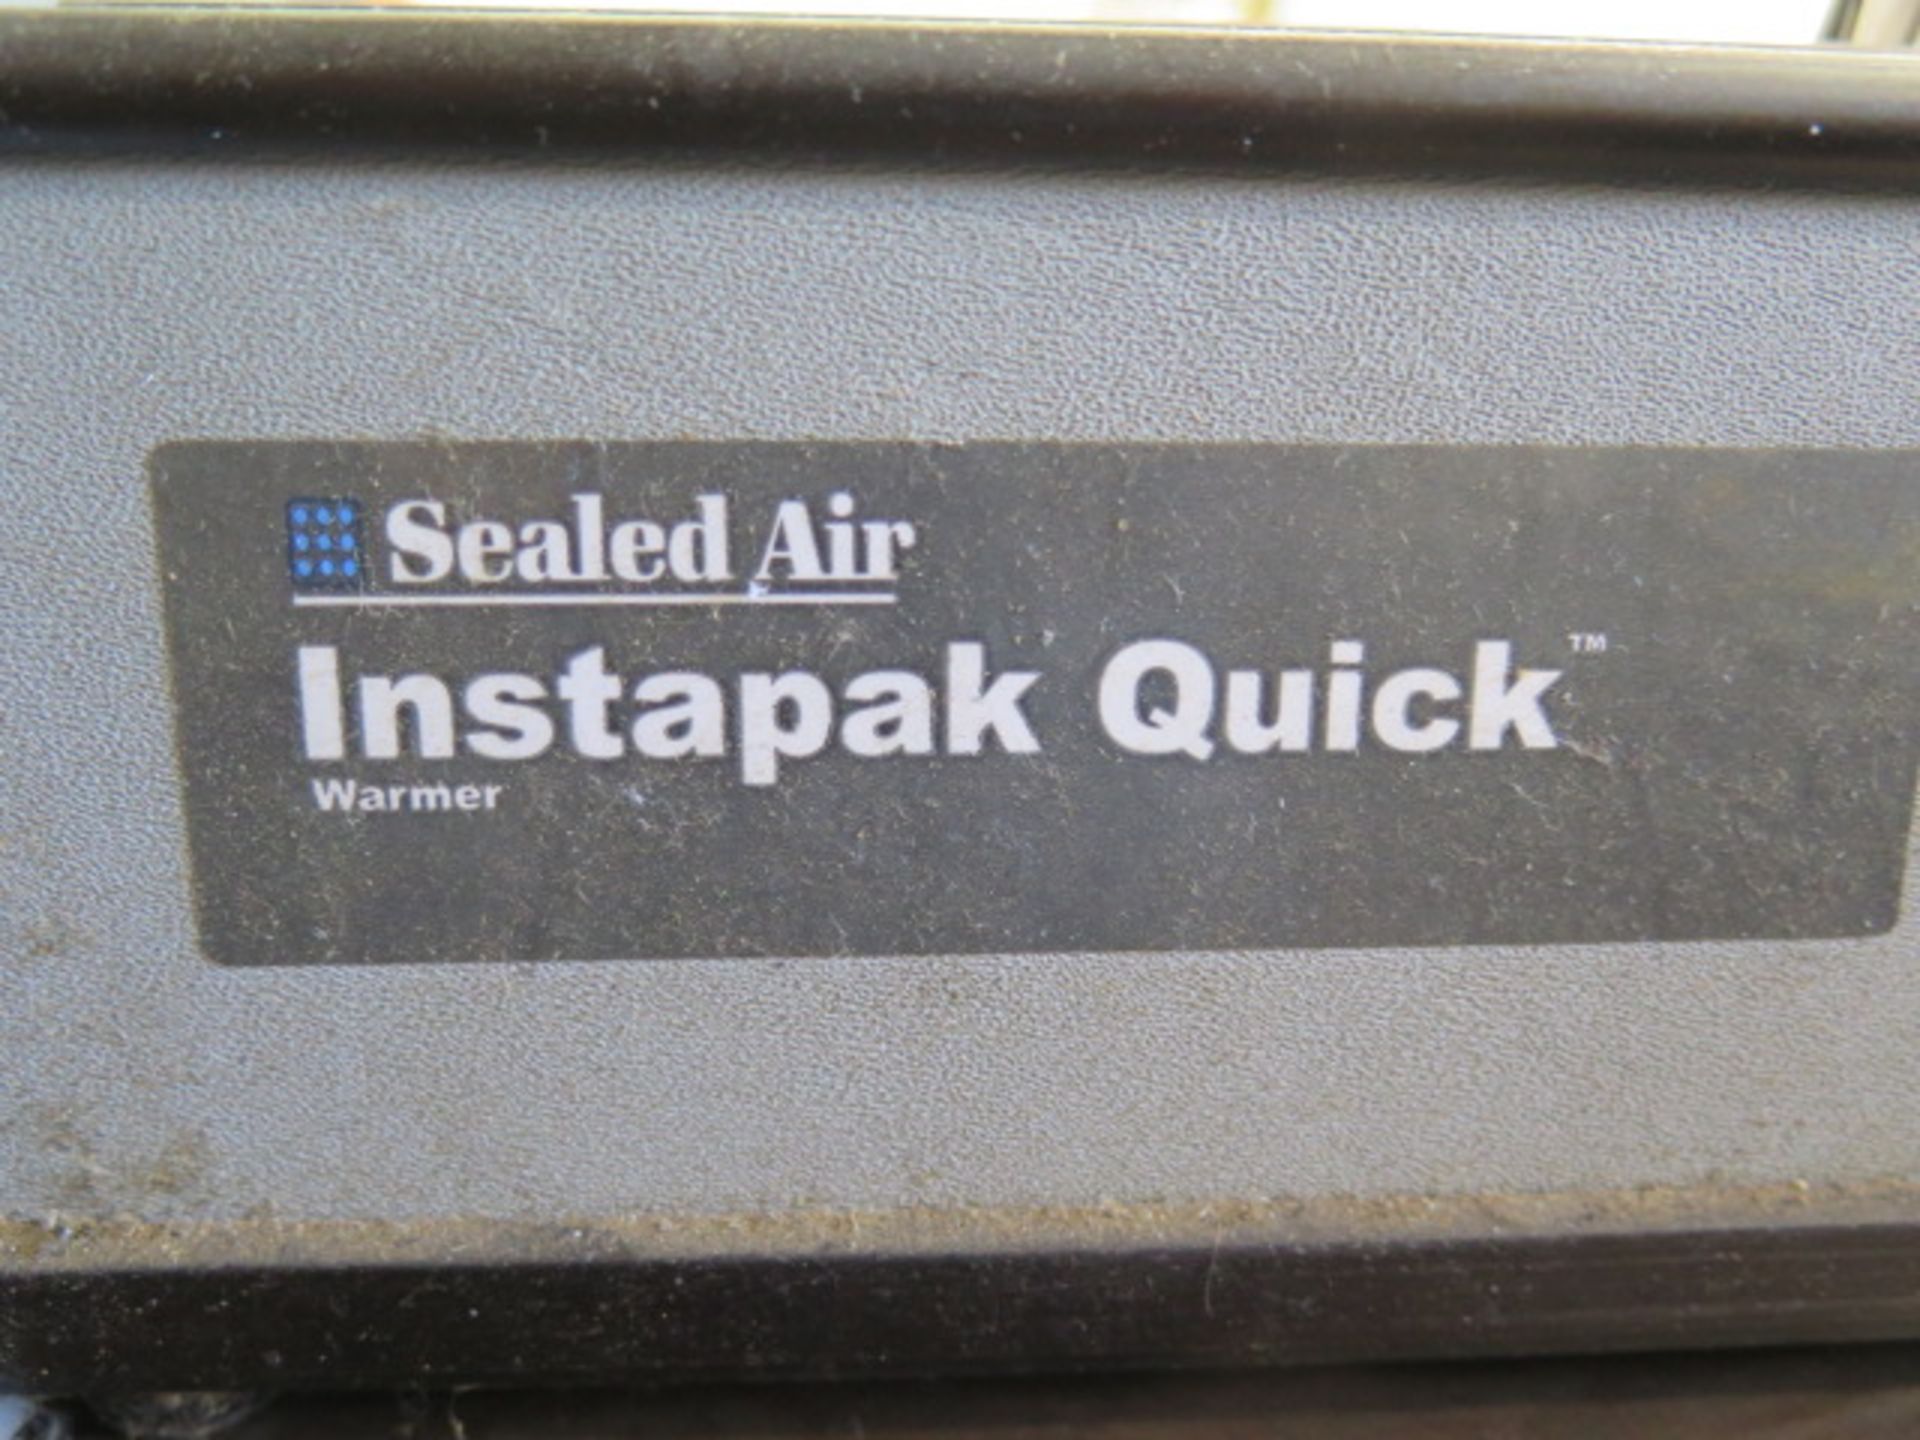 Sealed Air "Instapak Quick" Foam Packaging System (SOLD AS-IS - NO WARRANTY) - Image 8 of 9